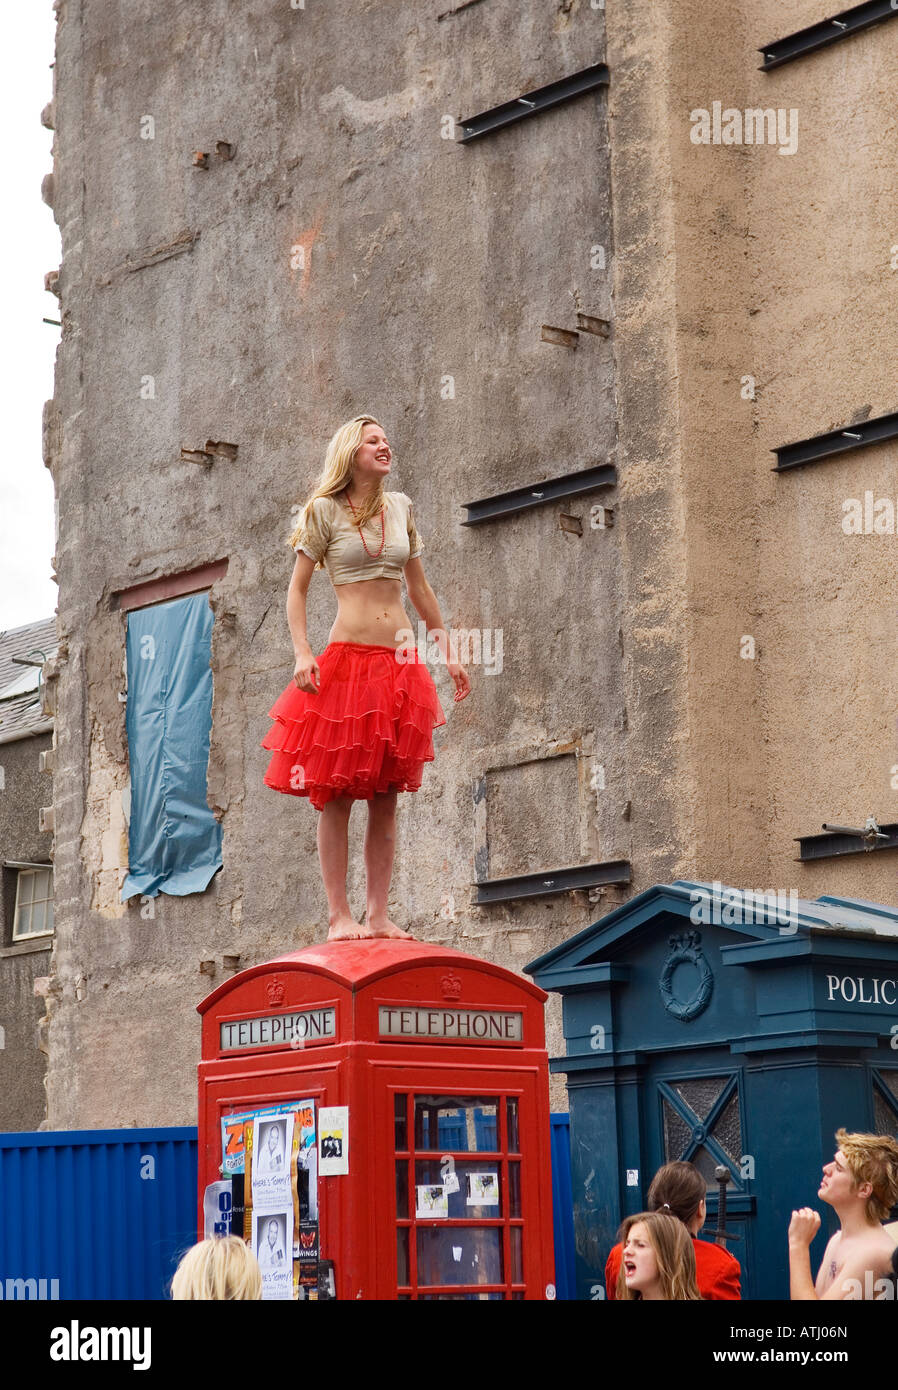 Edinburgh Festival Fringe, Scotland. Young woman promoting Fringe show stands on red telephone box in the High Street Stock Photo